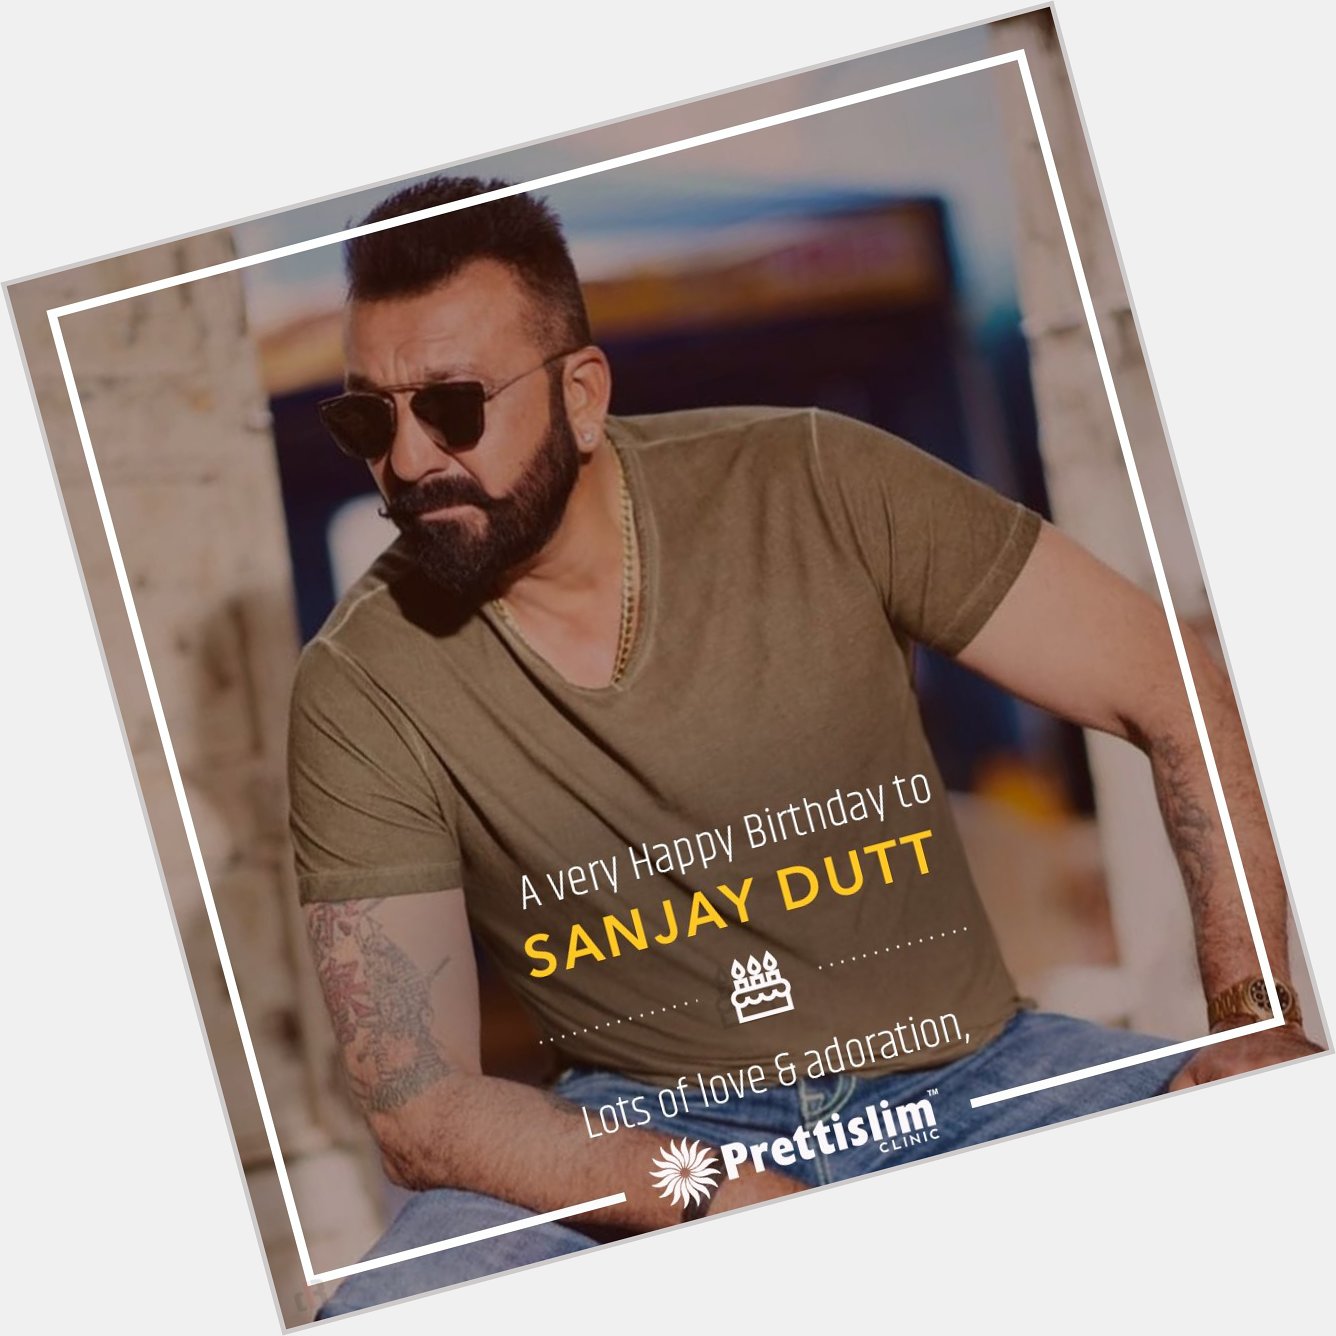 Wishing a very happy birthday to the talented Sanjay Dutt! | 